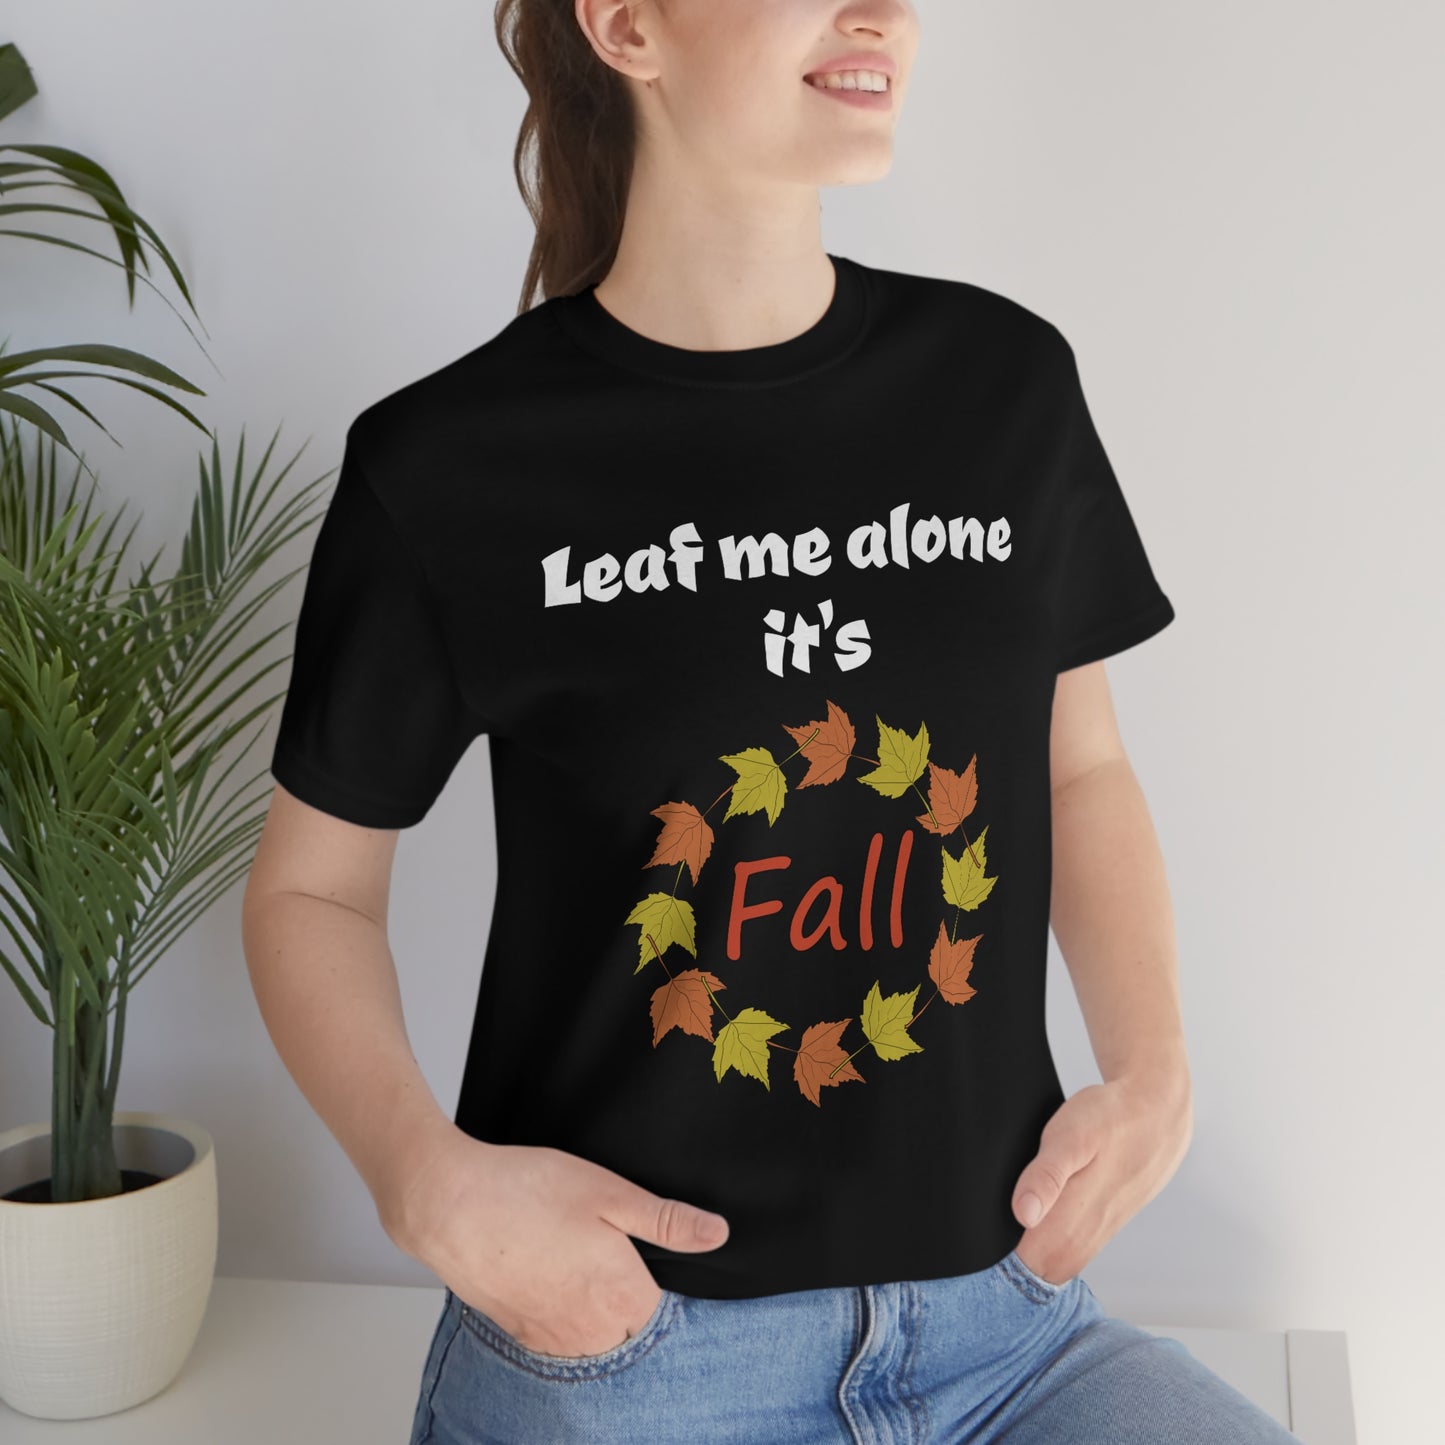 Leaf me alone it's Fall - Funny holiday - Unisex Short Sleeve Tee - CrazyTomTShirts